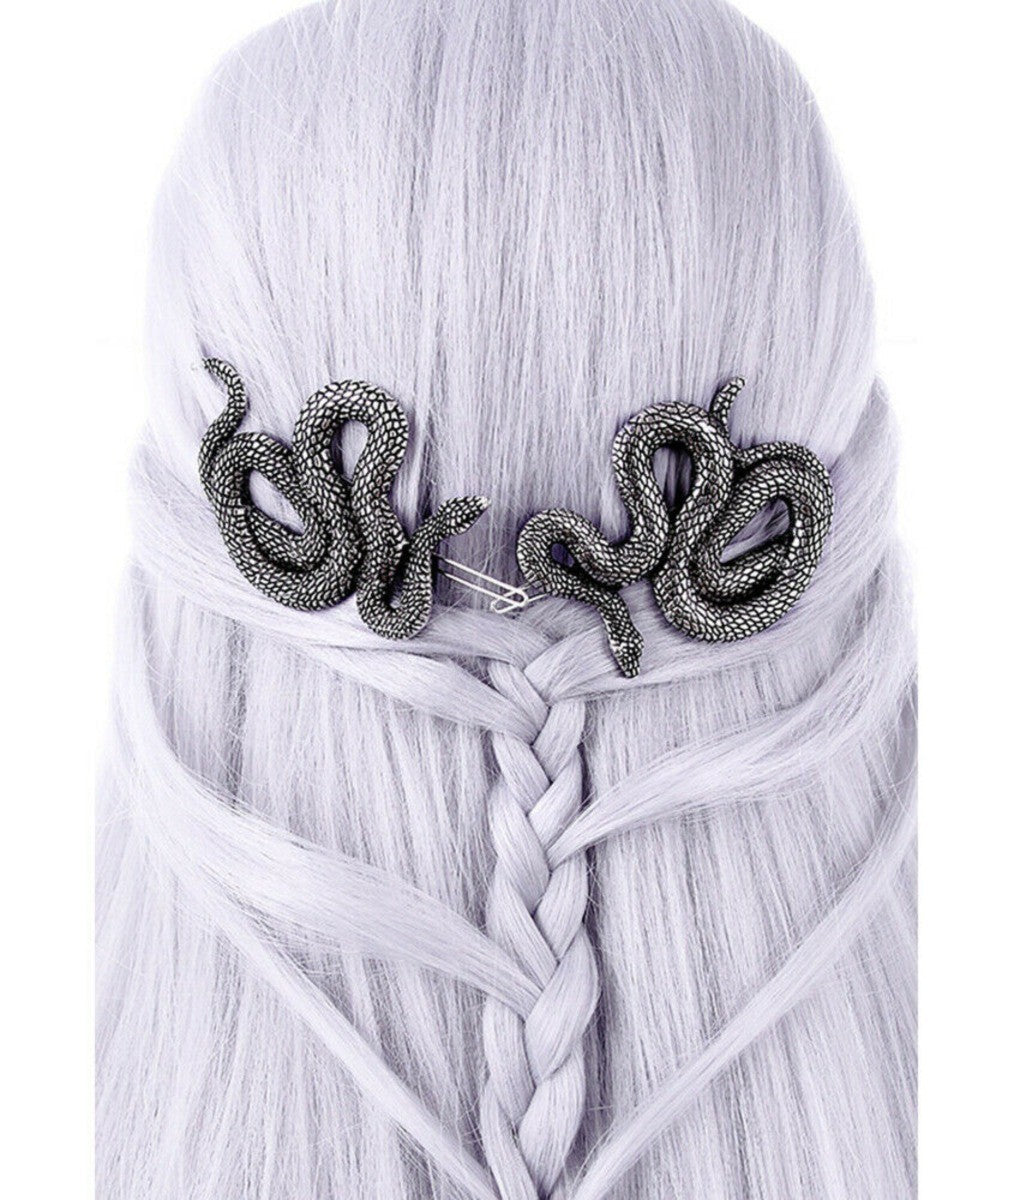 Restyle Pair of Snakes Gothic Hair Clip